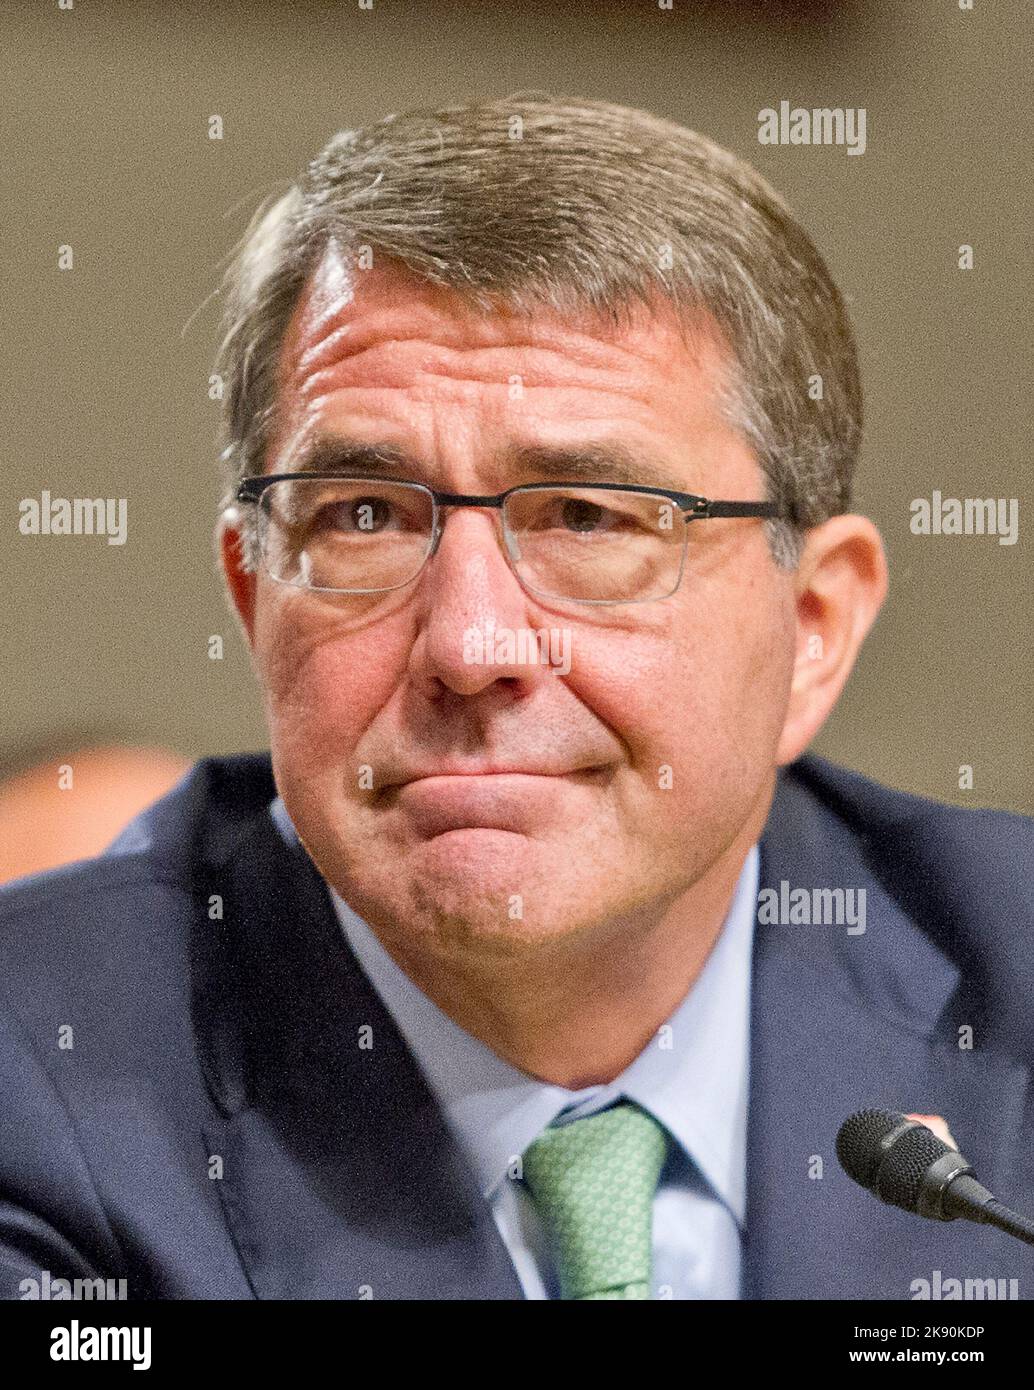 Washington, United States Of America. 29th July, 2015. United States Secretary of Defense Ashton Carter gives testimony before the US Senate Committee on Armed Services concerning 'Impacts of the Joint Comprehensive Plan of Action (JCPOA) on U.S. Interests and the Military Balance in the Middle East' on Capitol Hill on Wednesday, July 29, 2015.Credit: Ron Sachs/CNP/Sipa USA Credit: Sipa USA/Alamy Live News Stock Photo